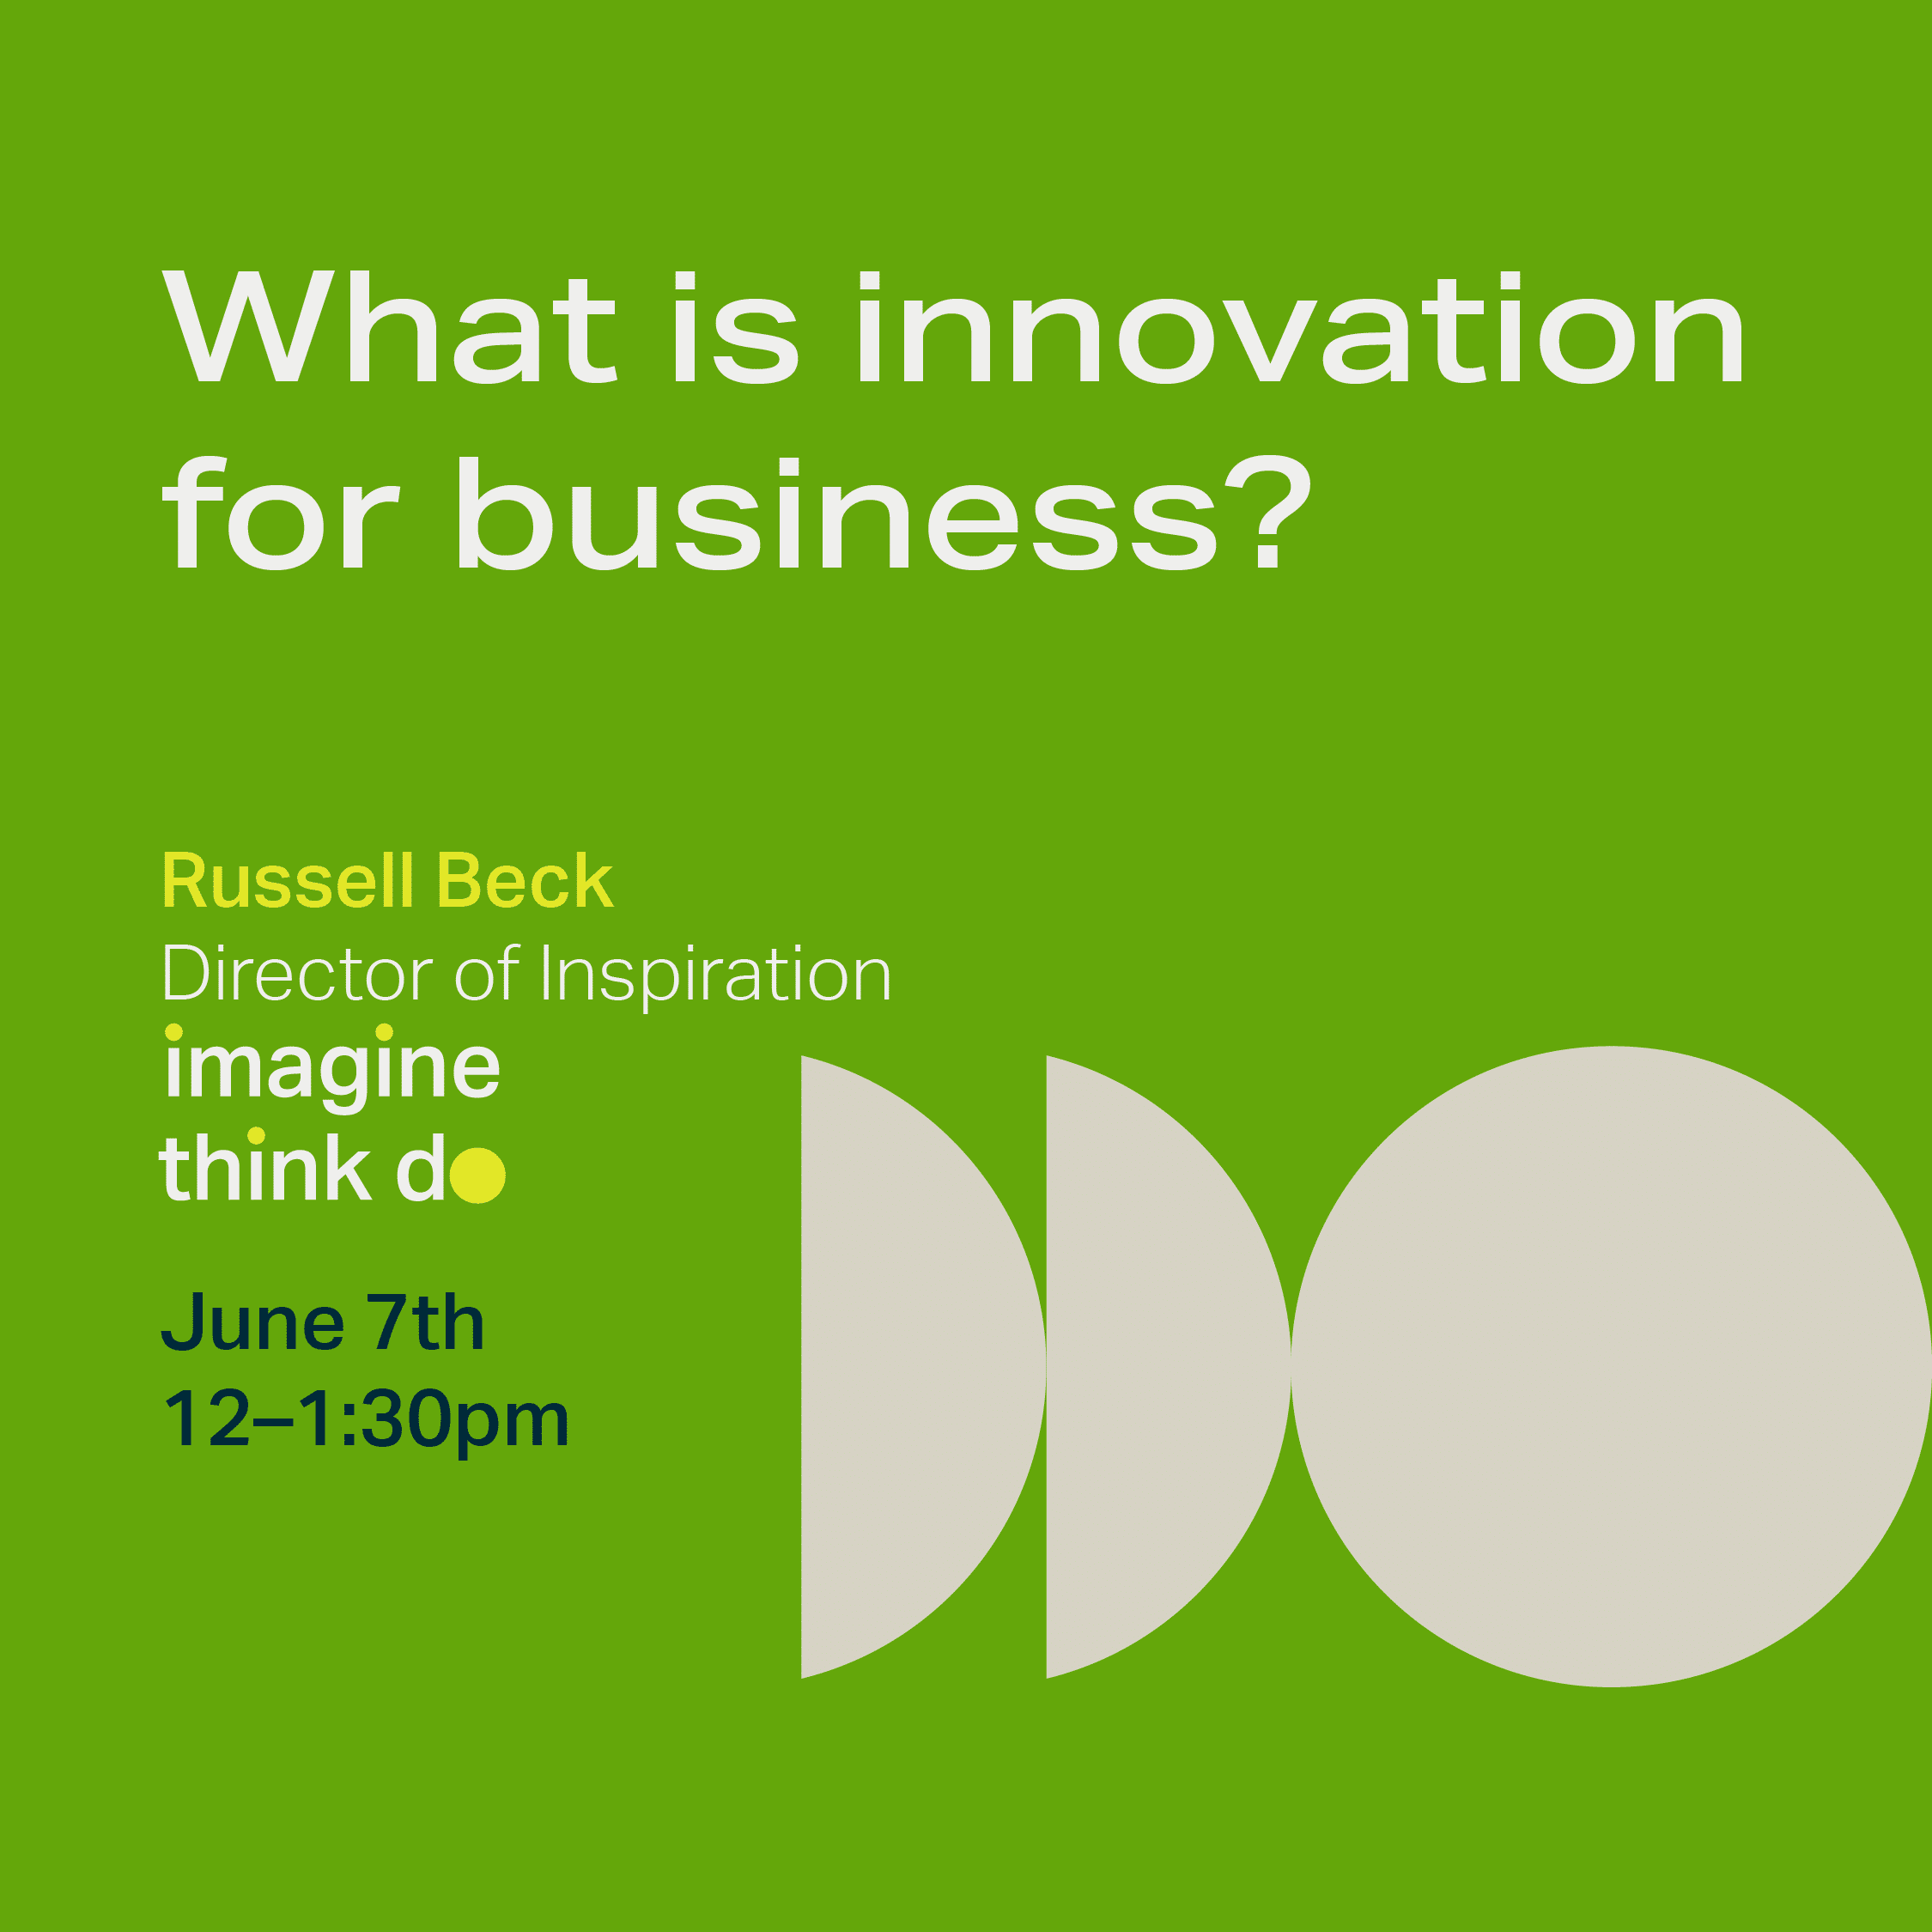 What is innovation for business?